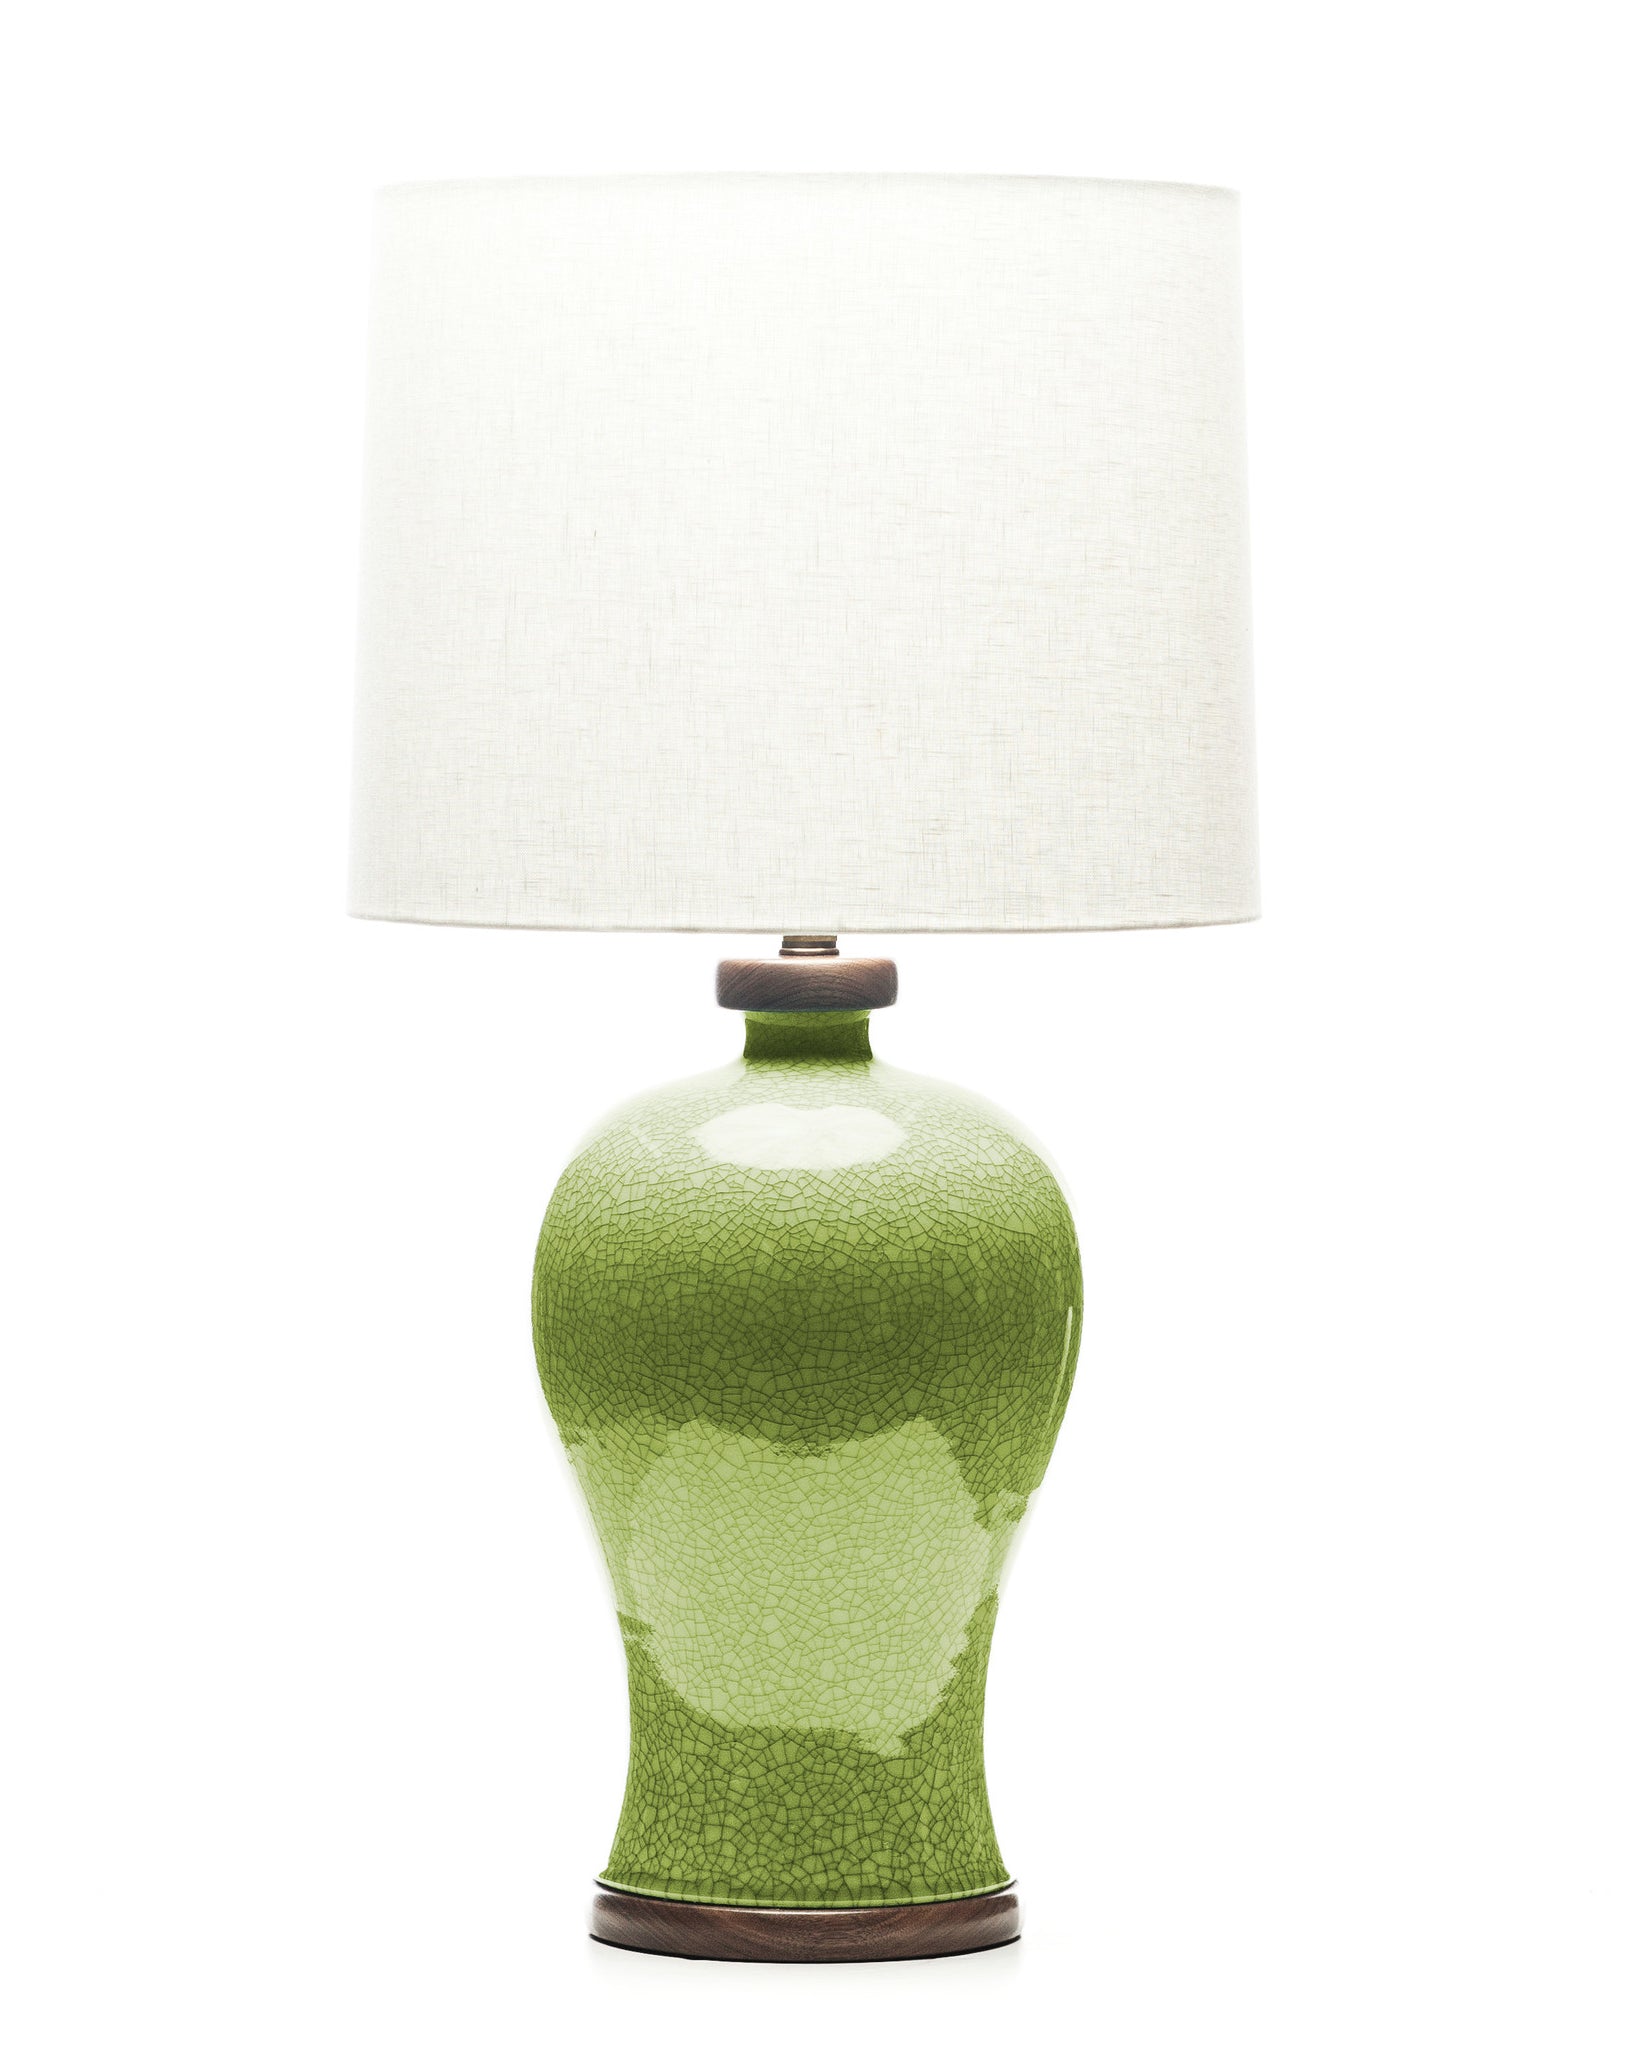 Lawrence & Scott Dashiell Porcelain Table Lamps in Celadon Crackle with Walnut Base